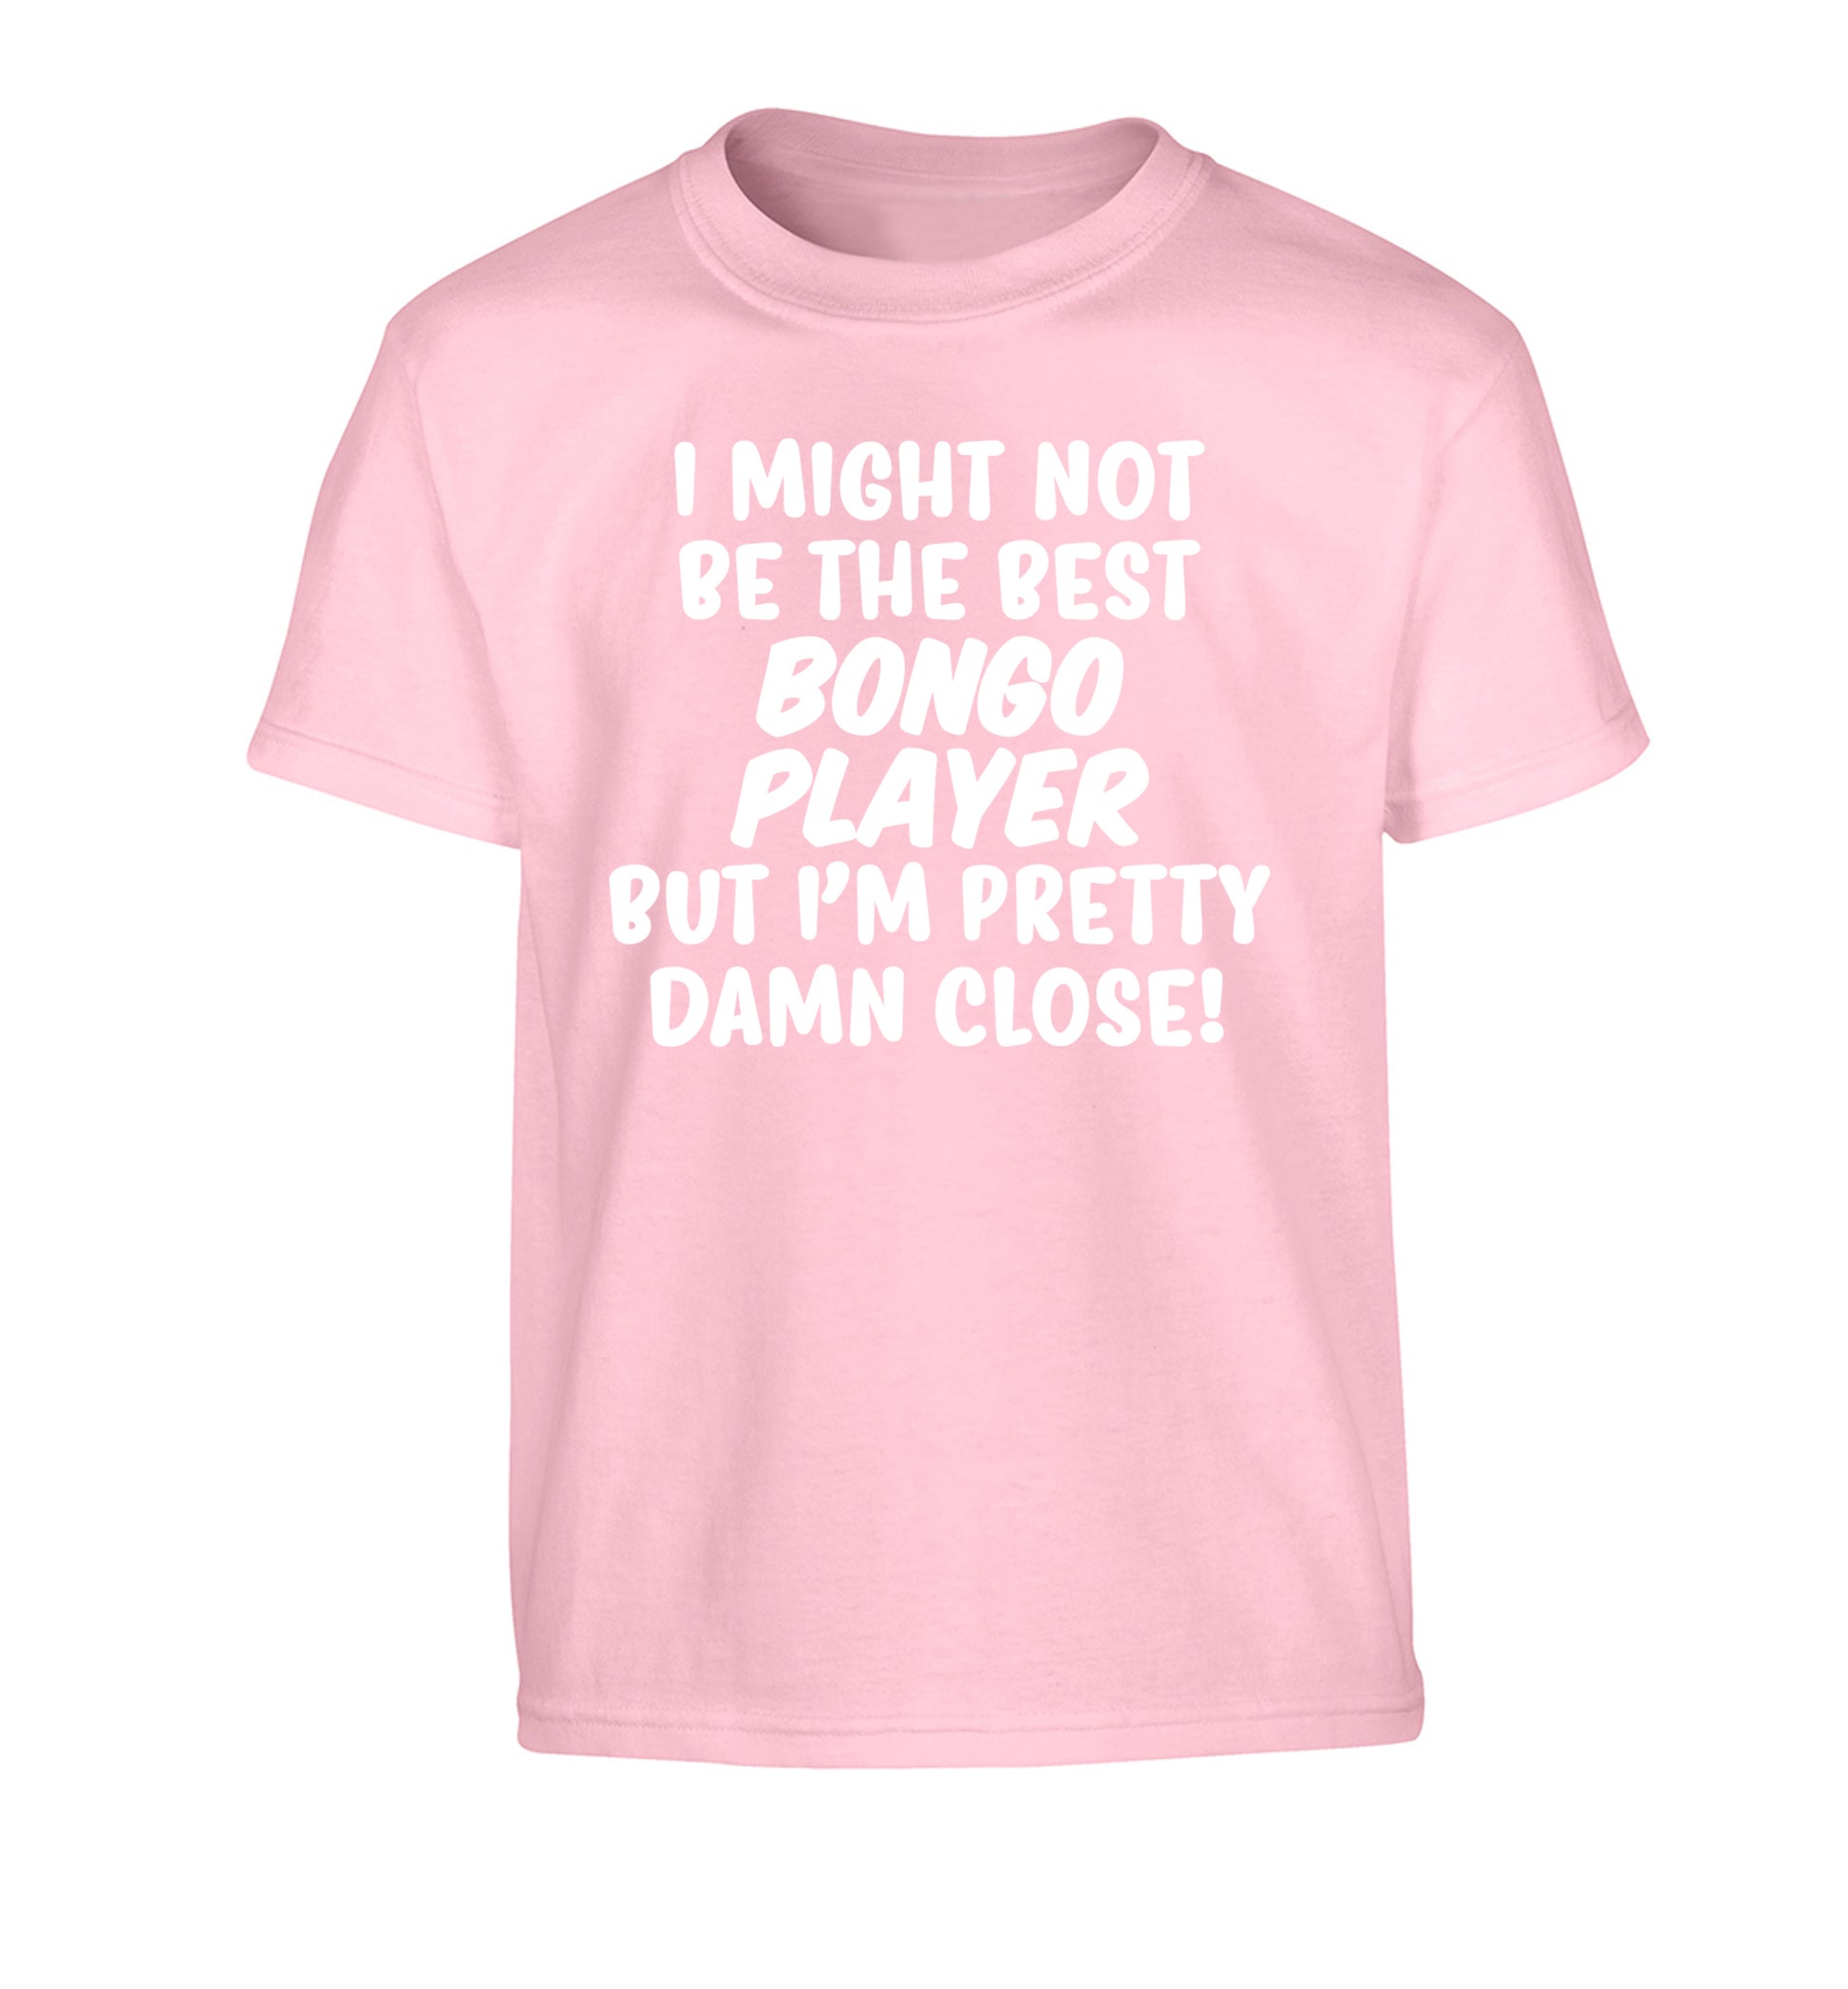 I might not be the best bongo player but I'm pretty close! Children's light pink Tshirt 12-14 Years